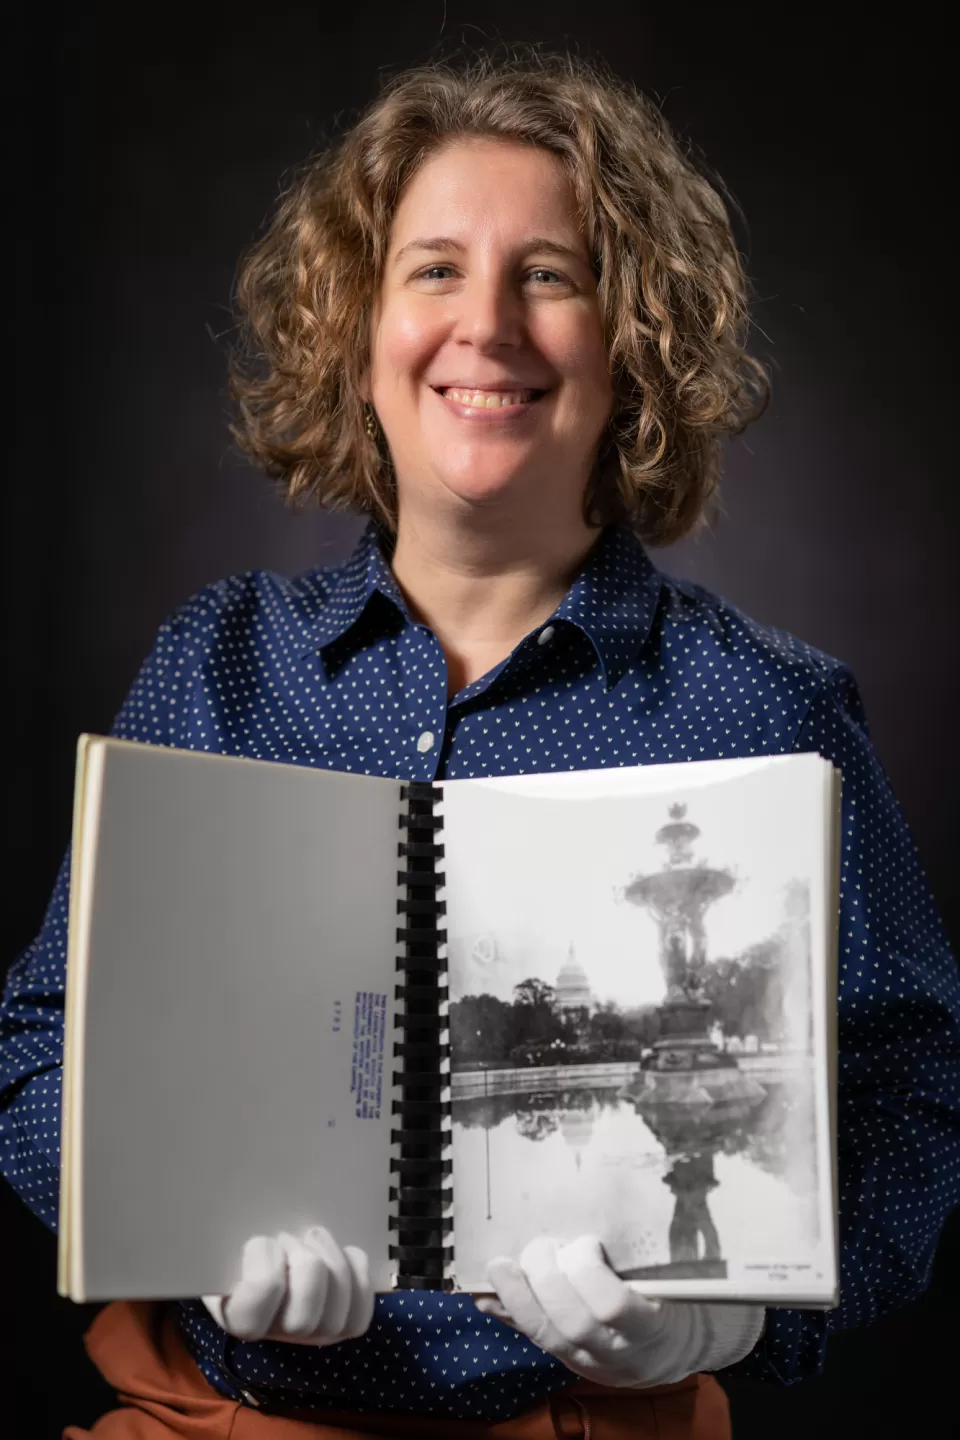 Photo portrait of a person holding a book.